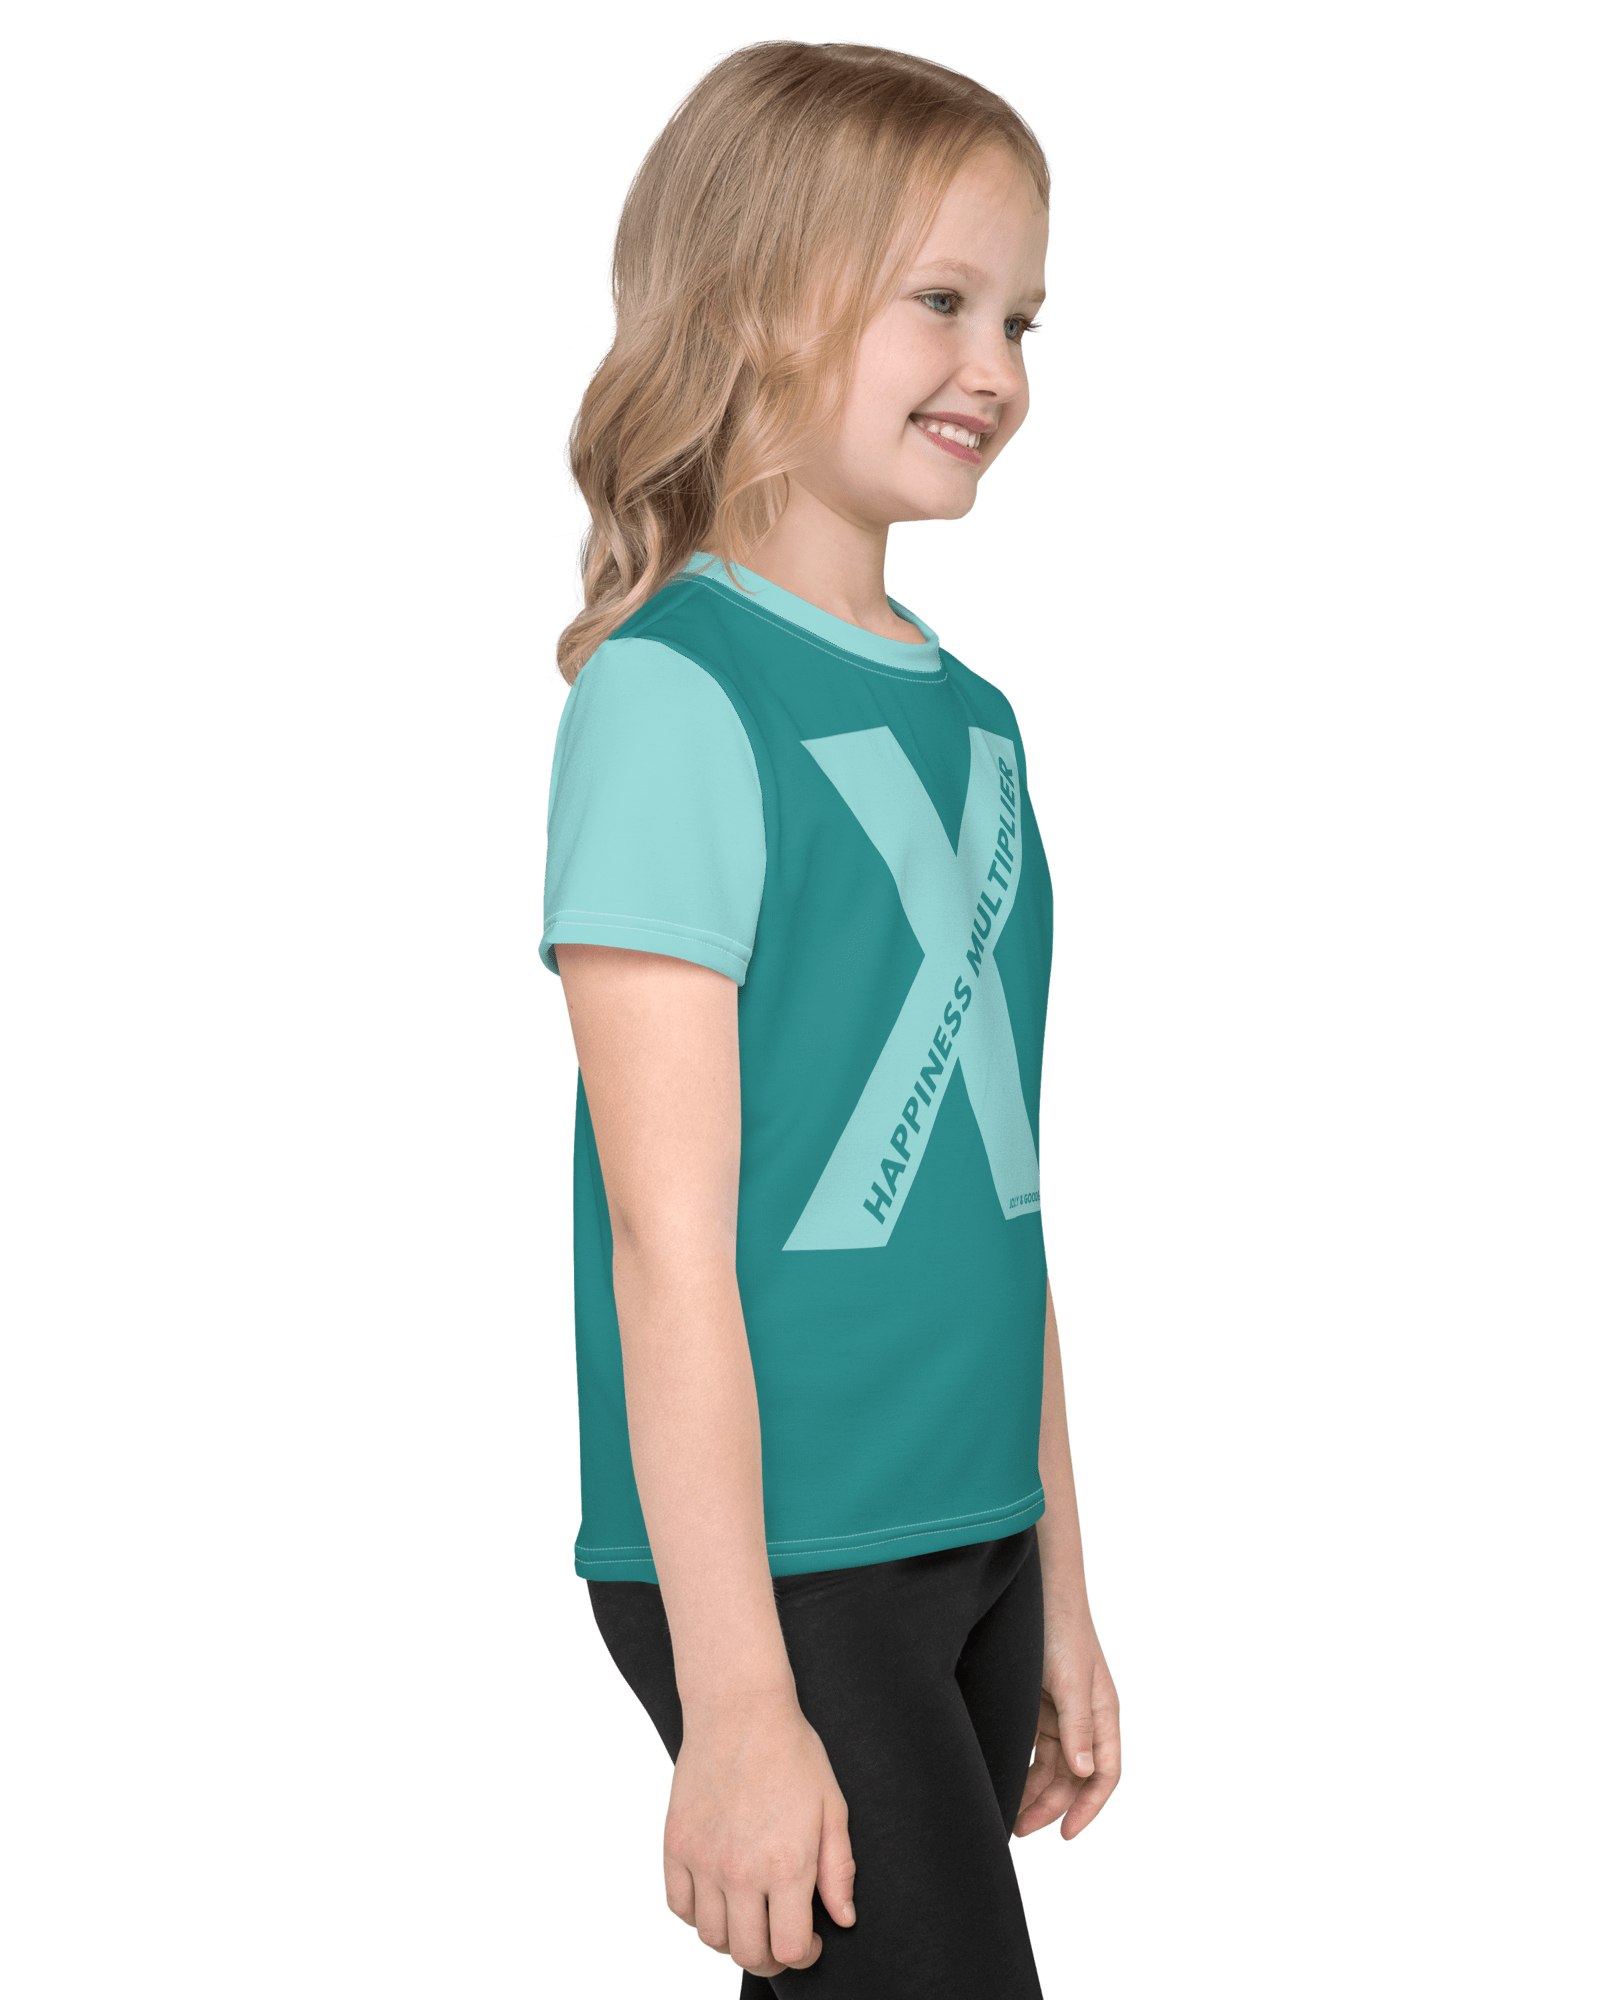 Happiness Multiplier Kids Shirt in Cool Jolly & Goode